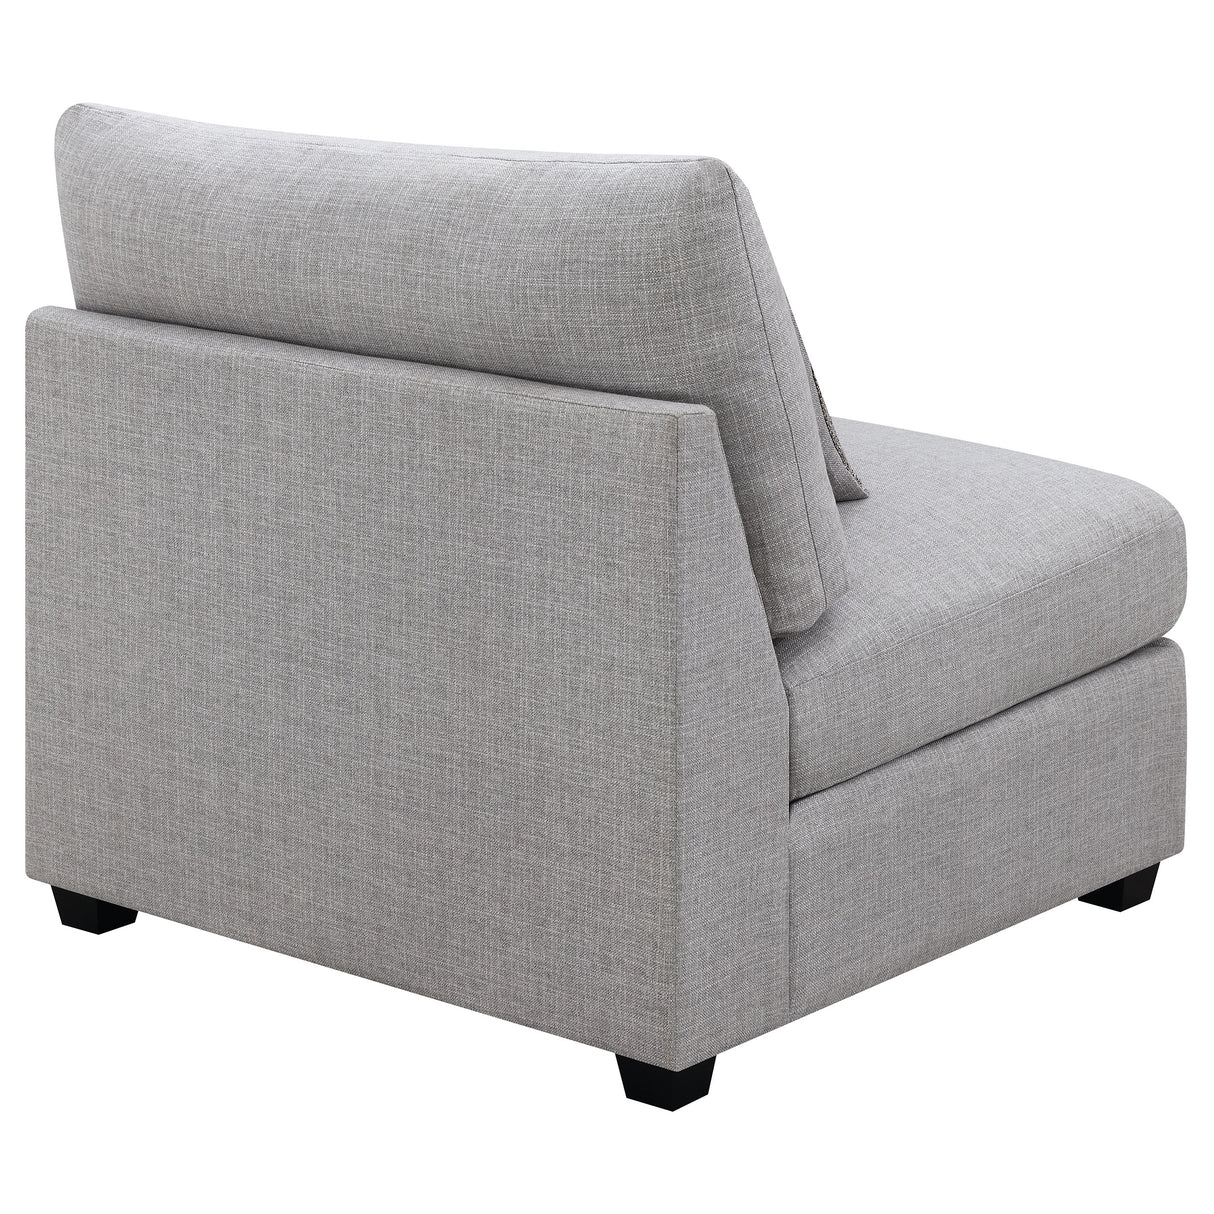 Armless Chair - Cambria Upholstered Armless Chair Grey